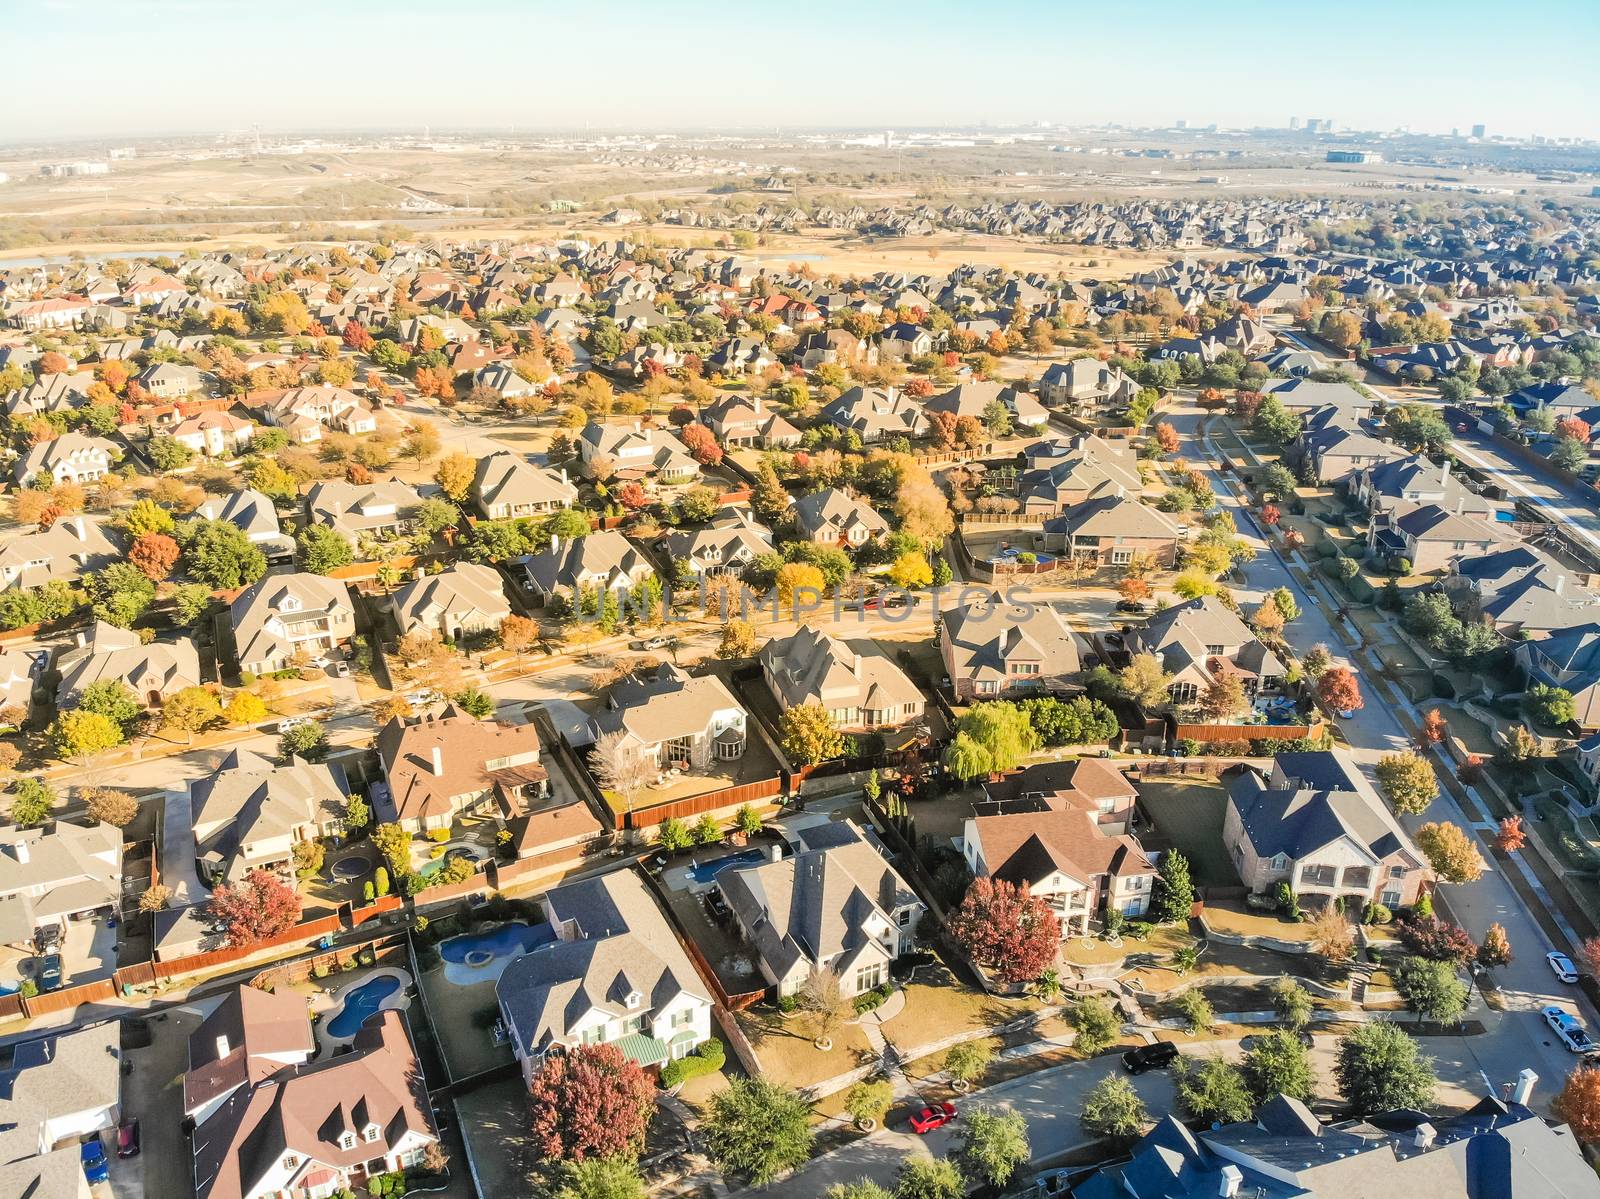 Aerial view new development neighborhood in Cedar Hill, Texas, USA in morning fall with colorful leaves. A city in Dallas and Ellis counties located approximately 16 miles southwest of downtown Dallas